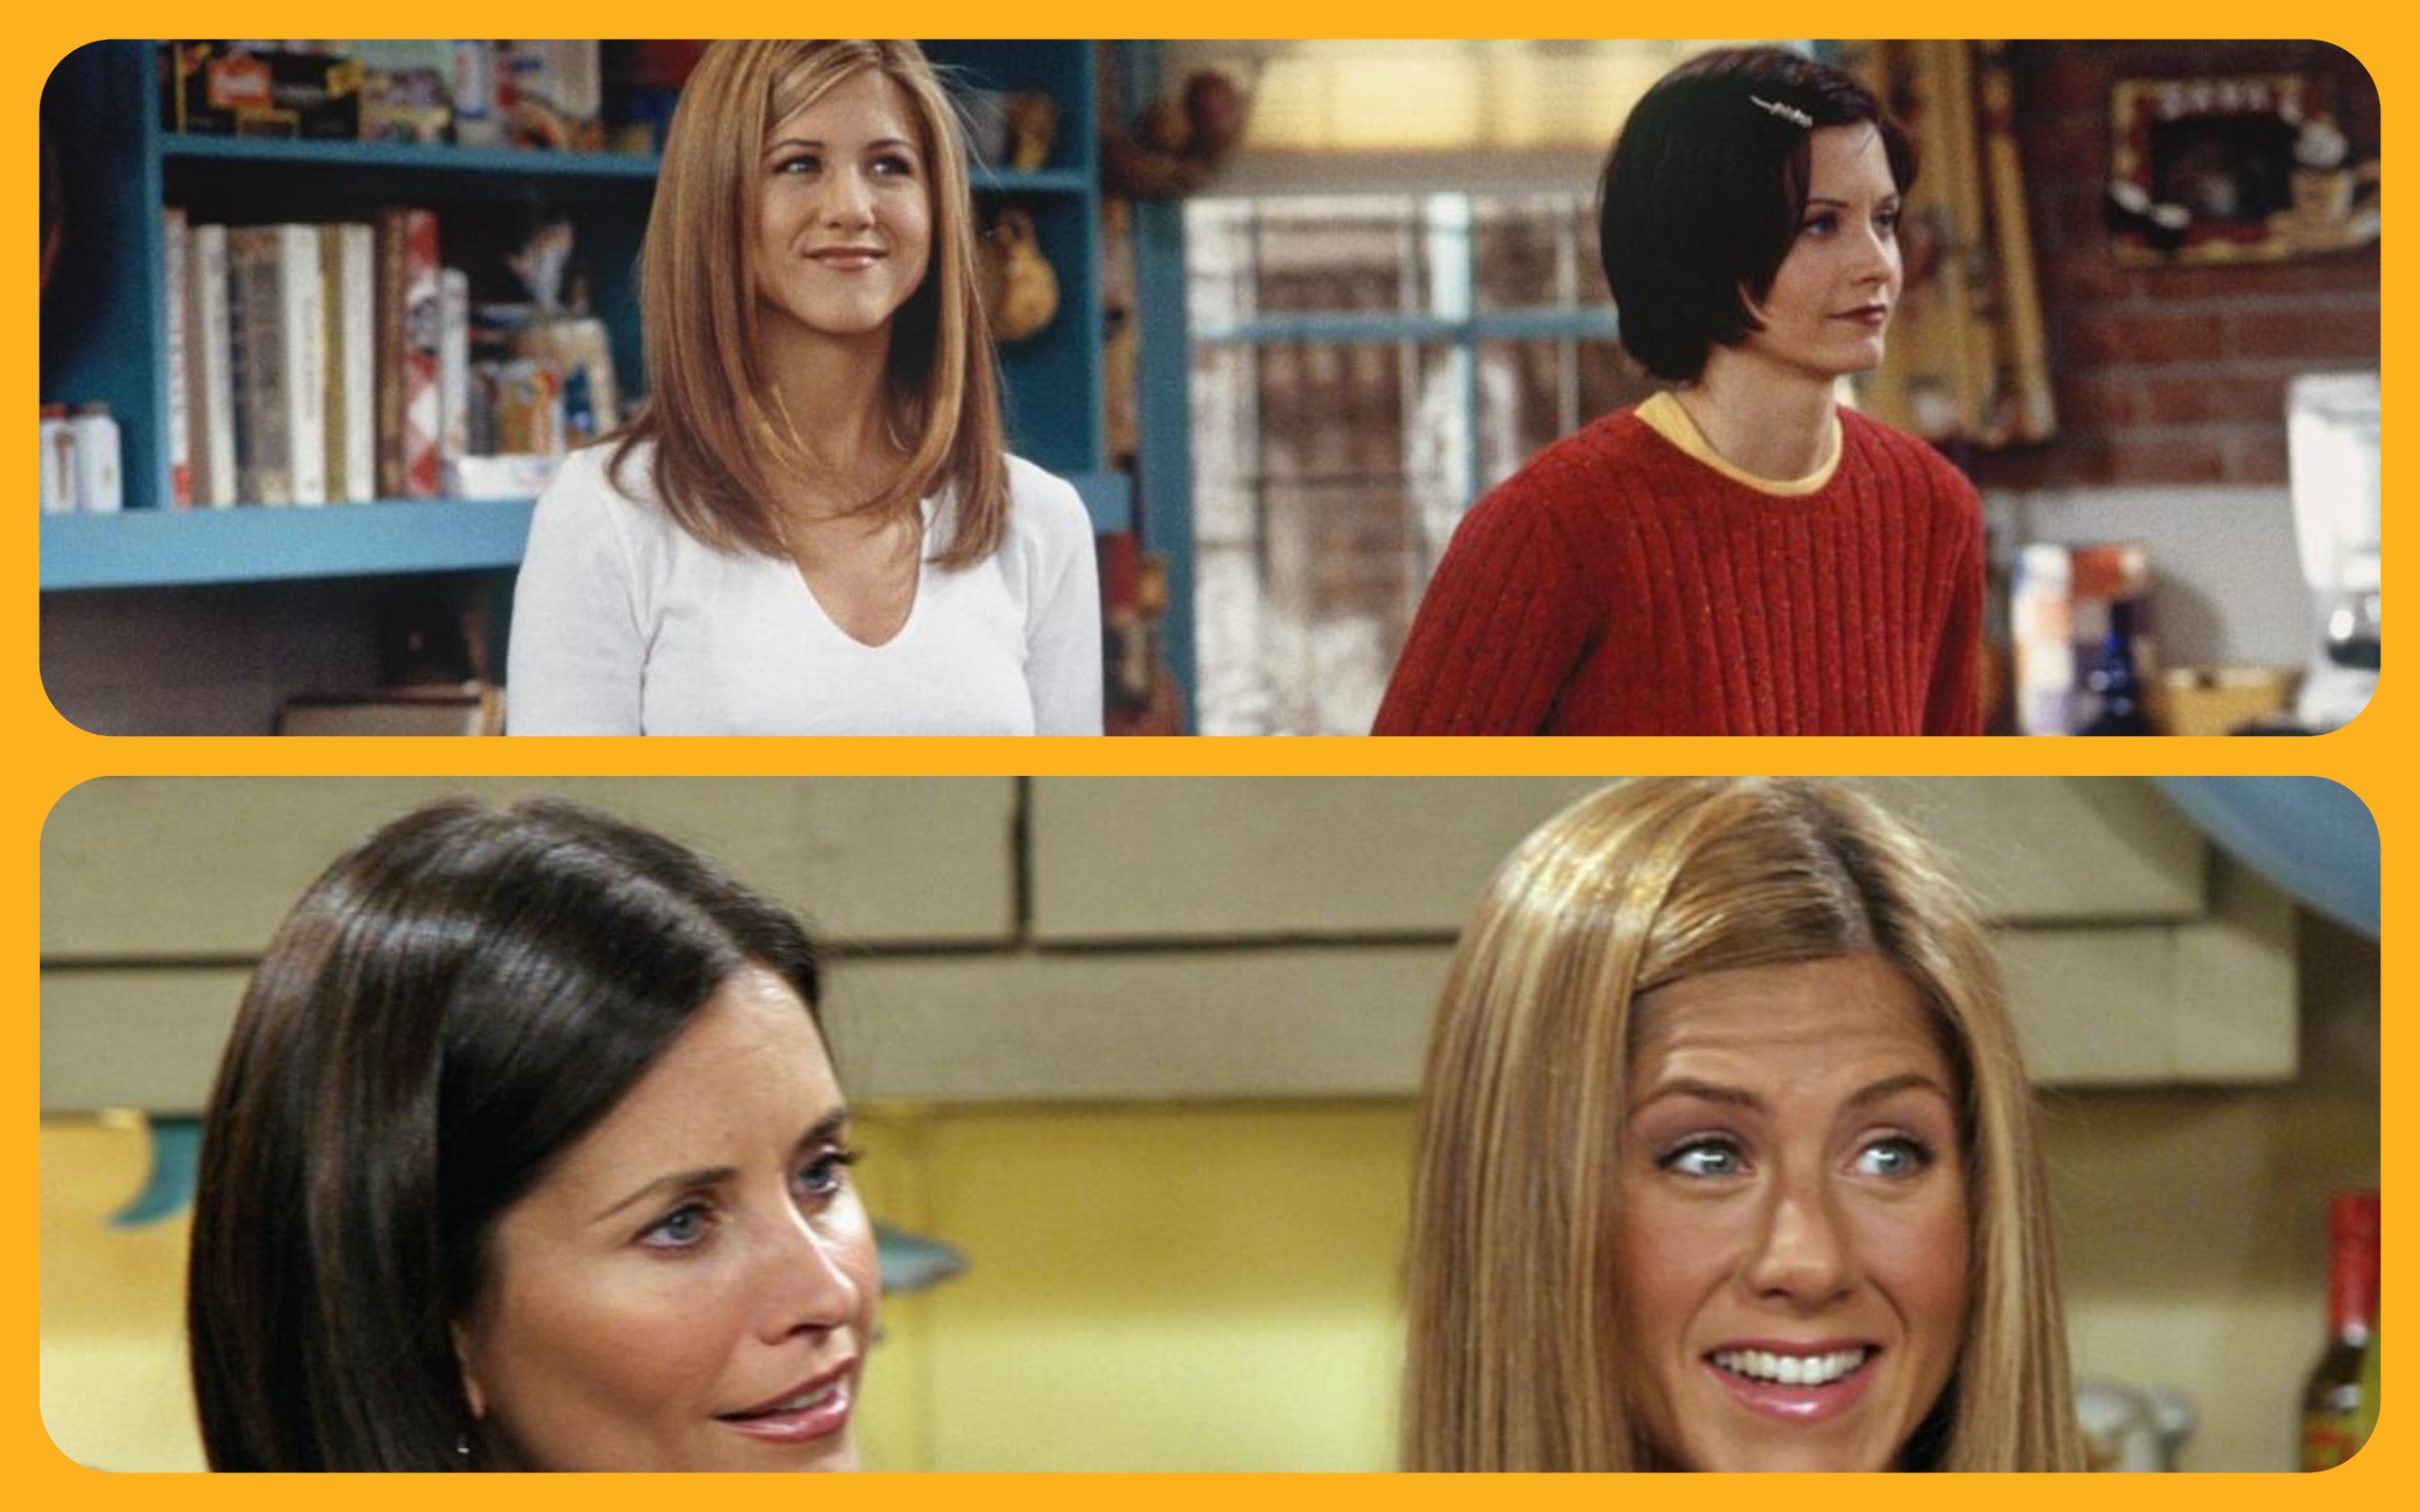 Jennifer Aniston's Friends character Rachel Green was all over the #freethenipple campaign super early.